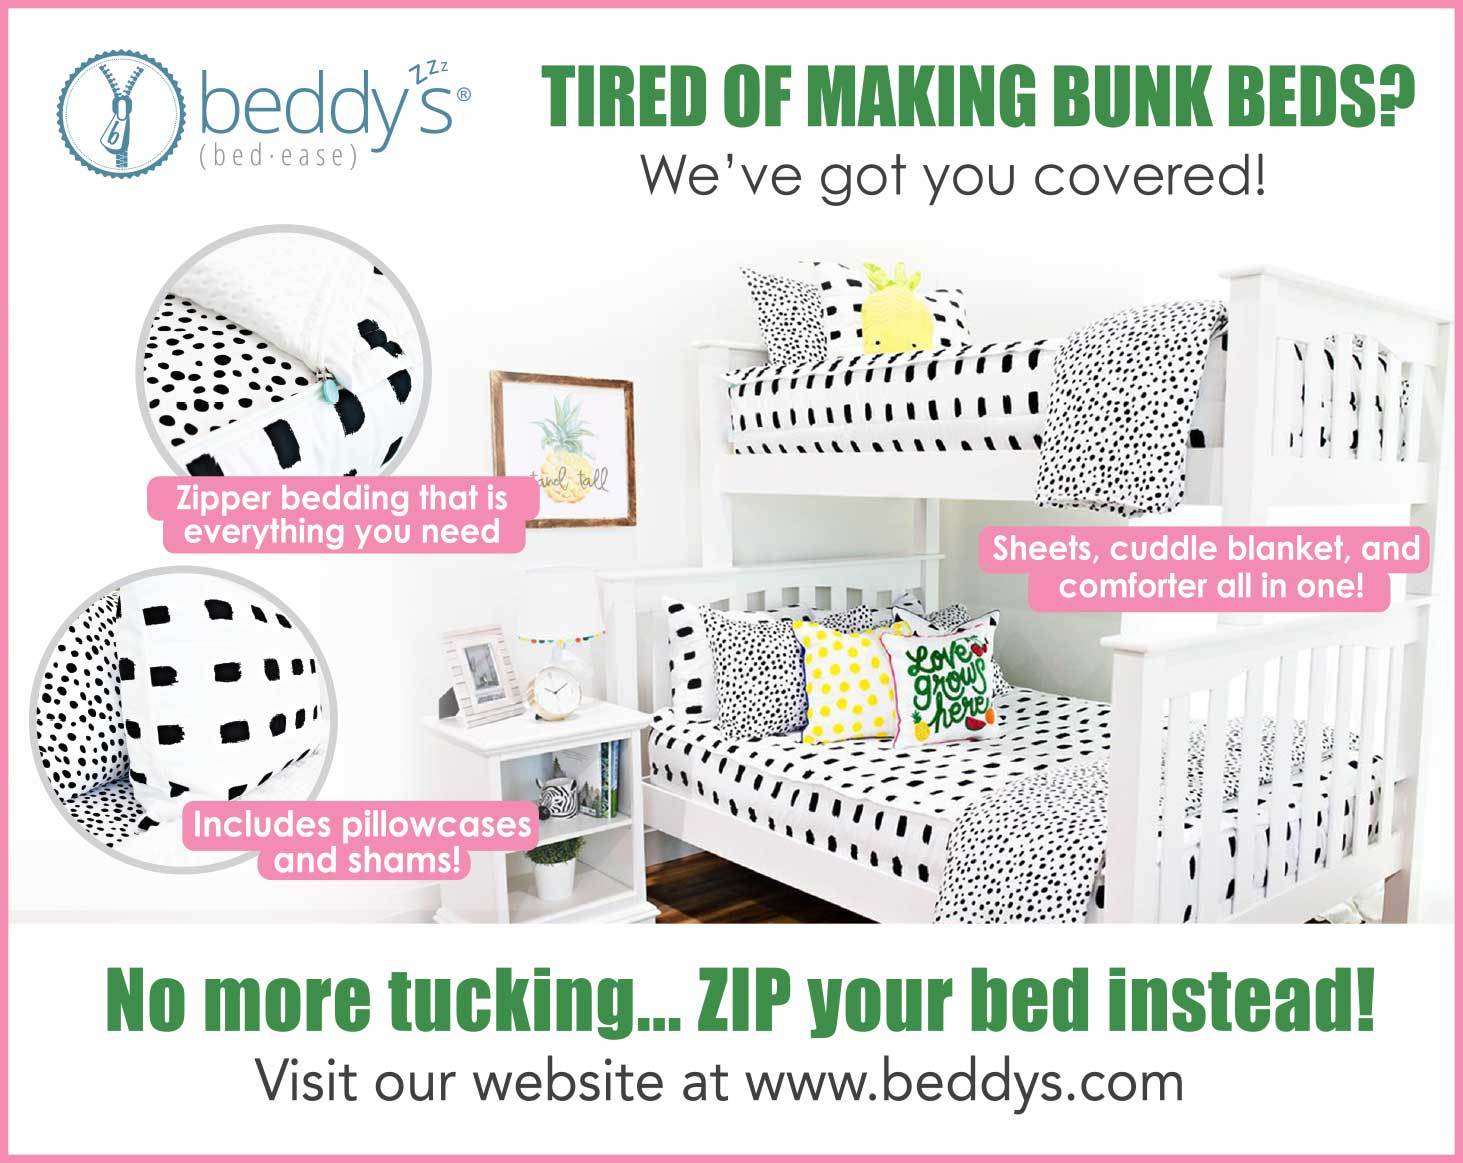 Beddy s ad with border